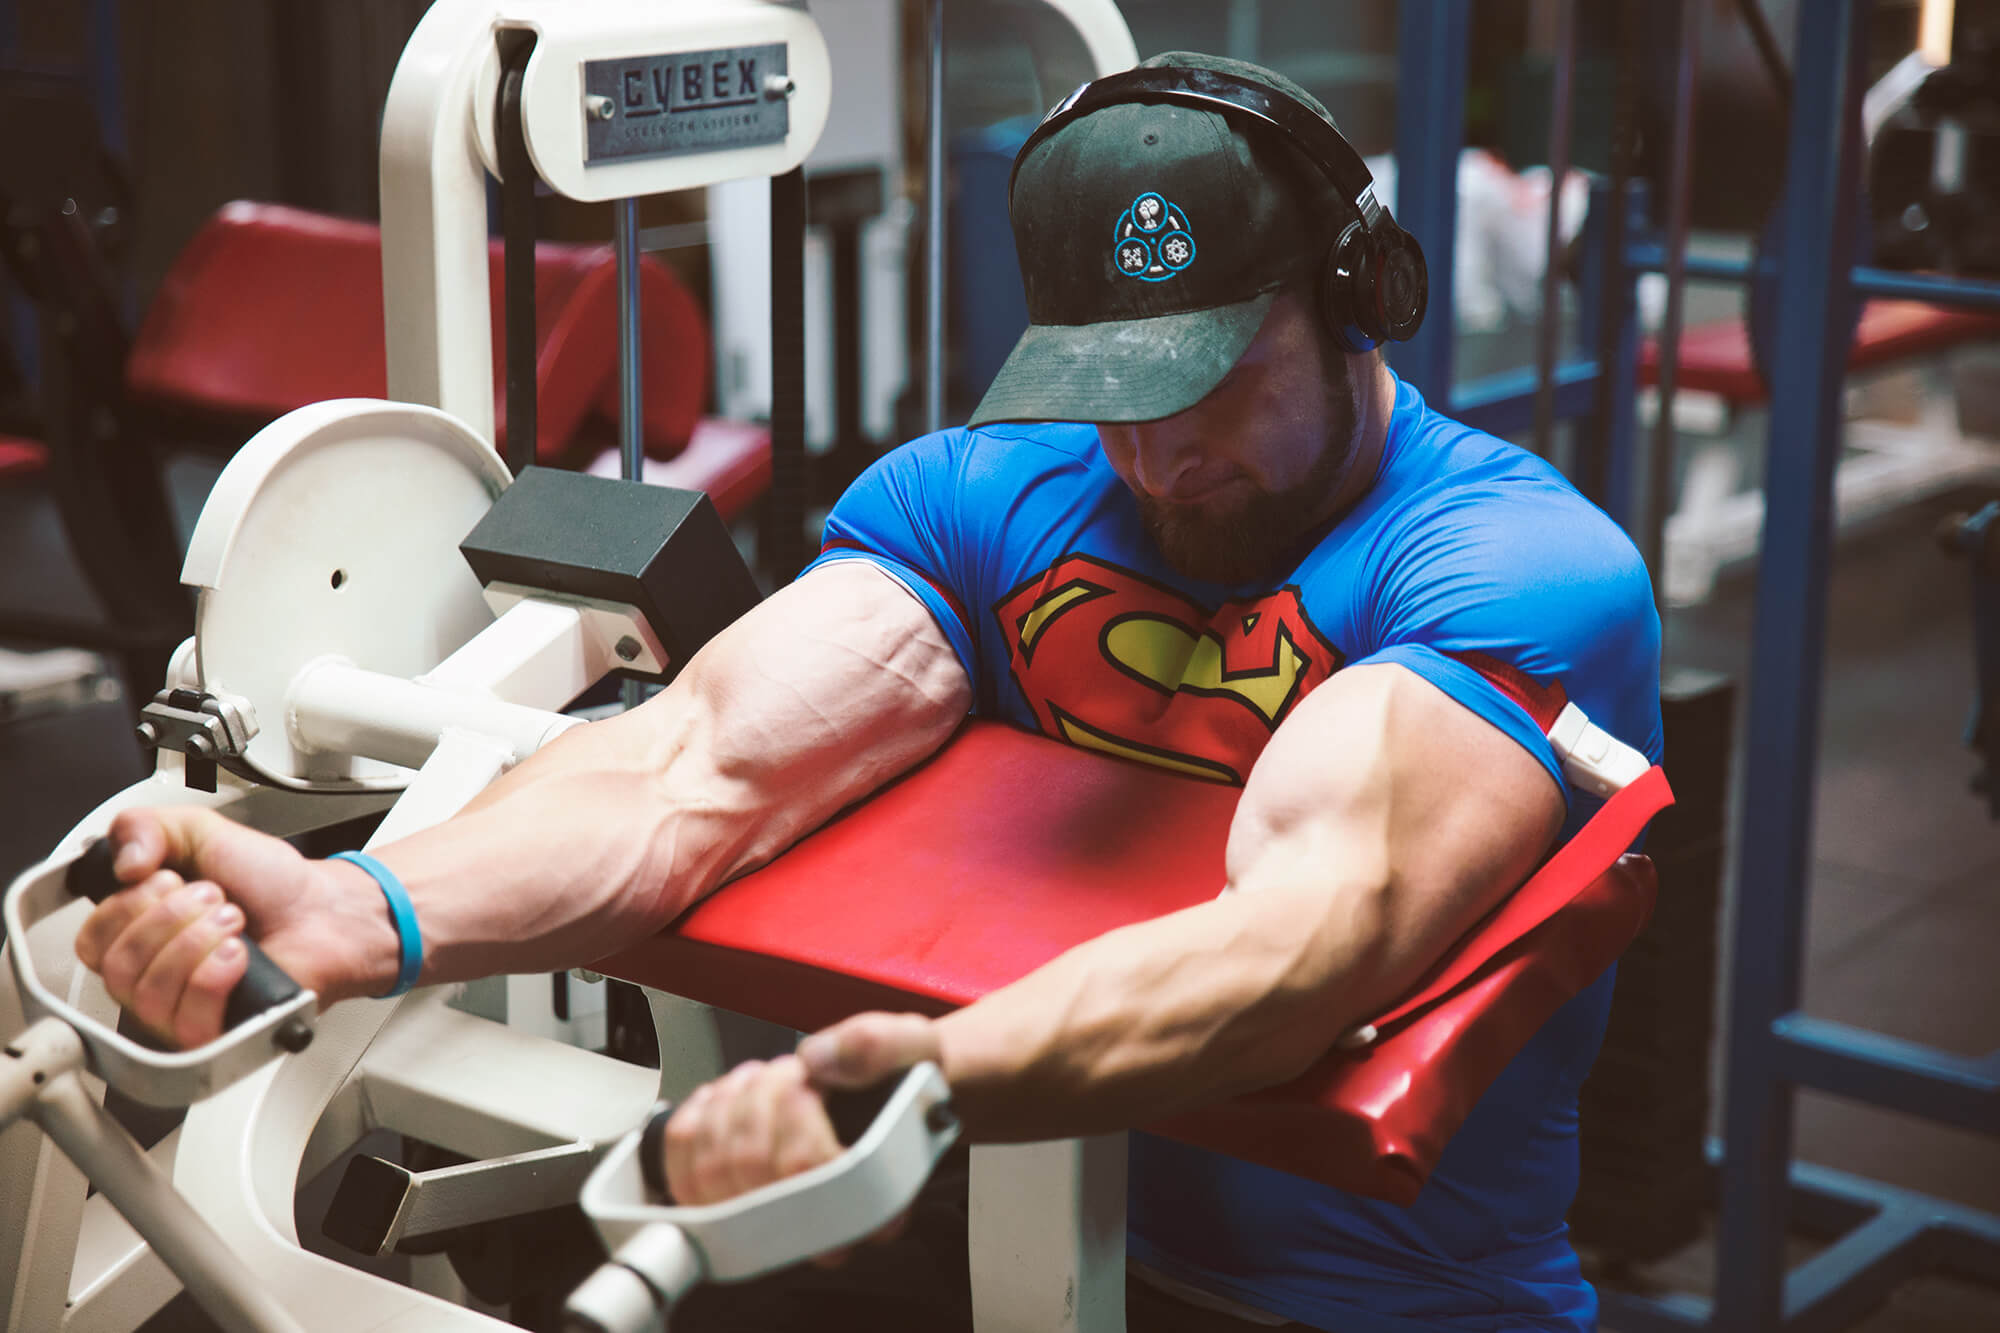 Is Beta Alanine The Holy Grail for Bodybuilding? - ATP Science